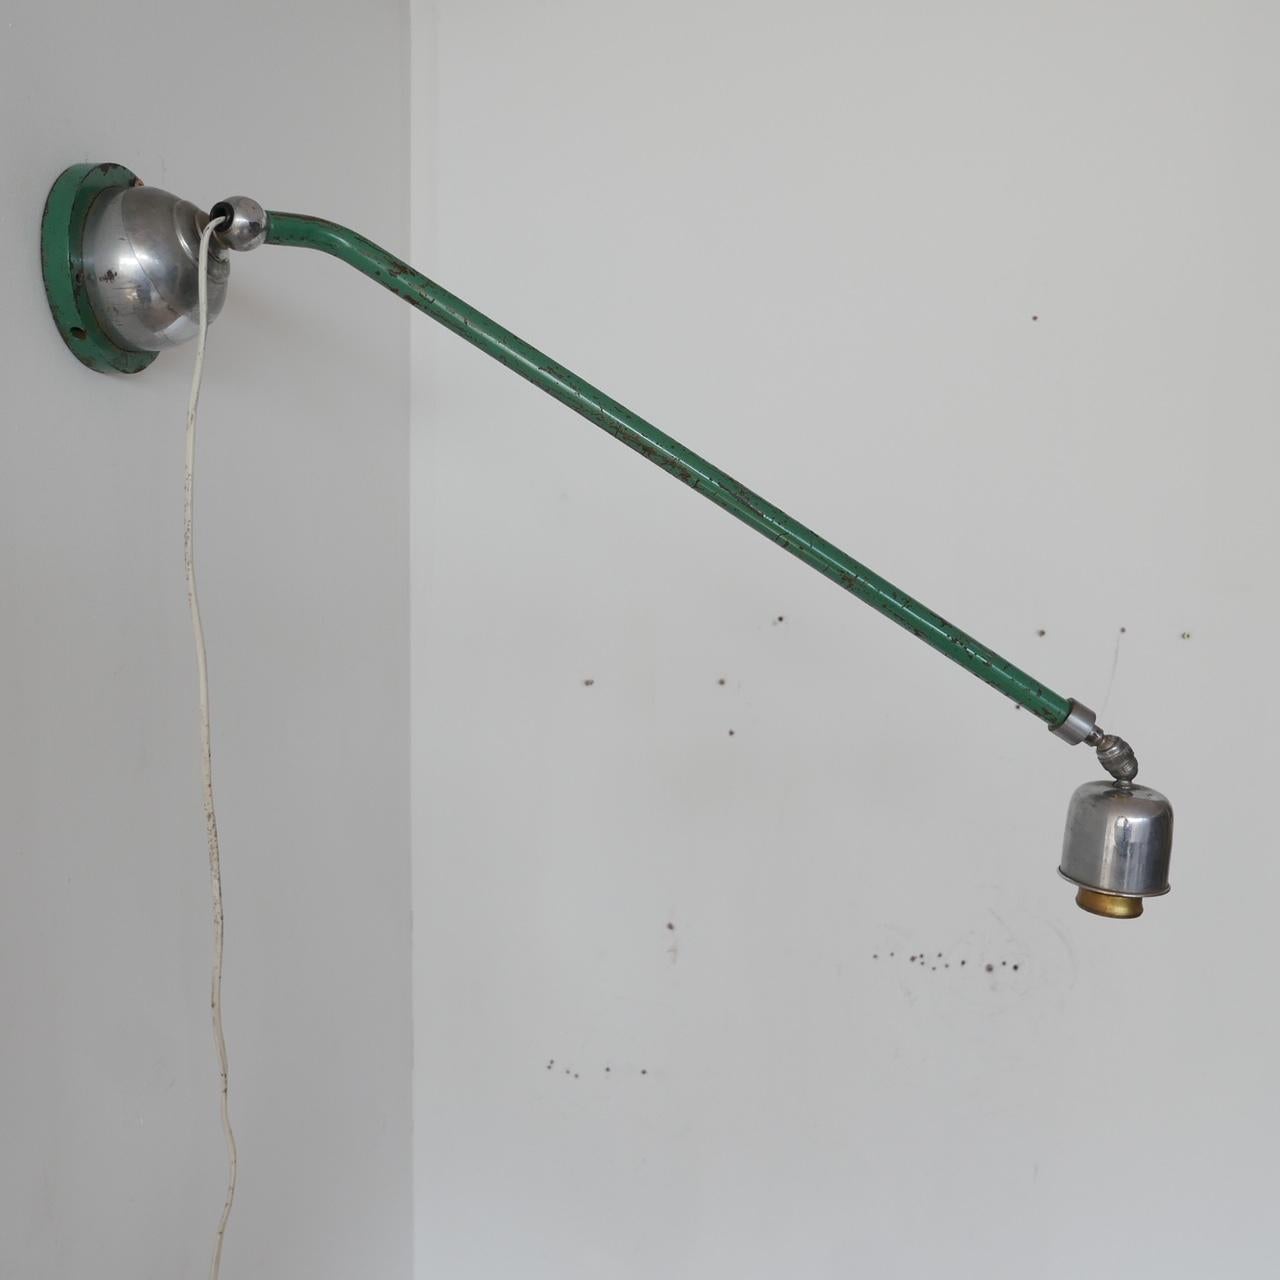 A telescopic wall light.

Sweden, circa 1950s.

Original green paint, some wear commensurate with age.

Re-wired and PAT Tested.

Location: London Gallery

Dimensions: 66 D when not extended x 11.5 W x 40 H. When extended it extends to 100